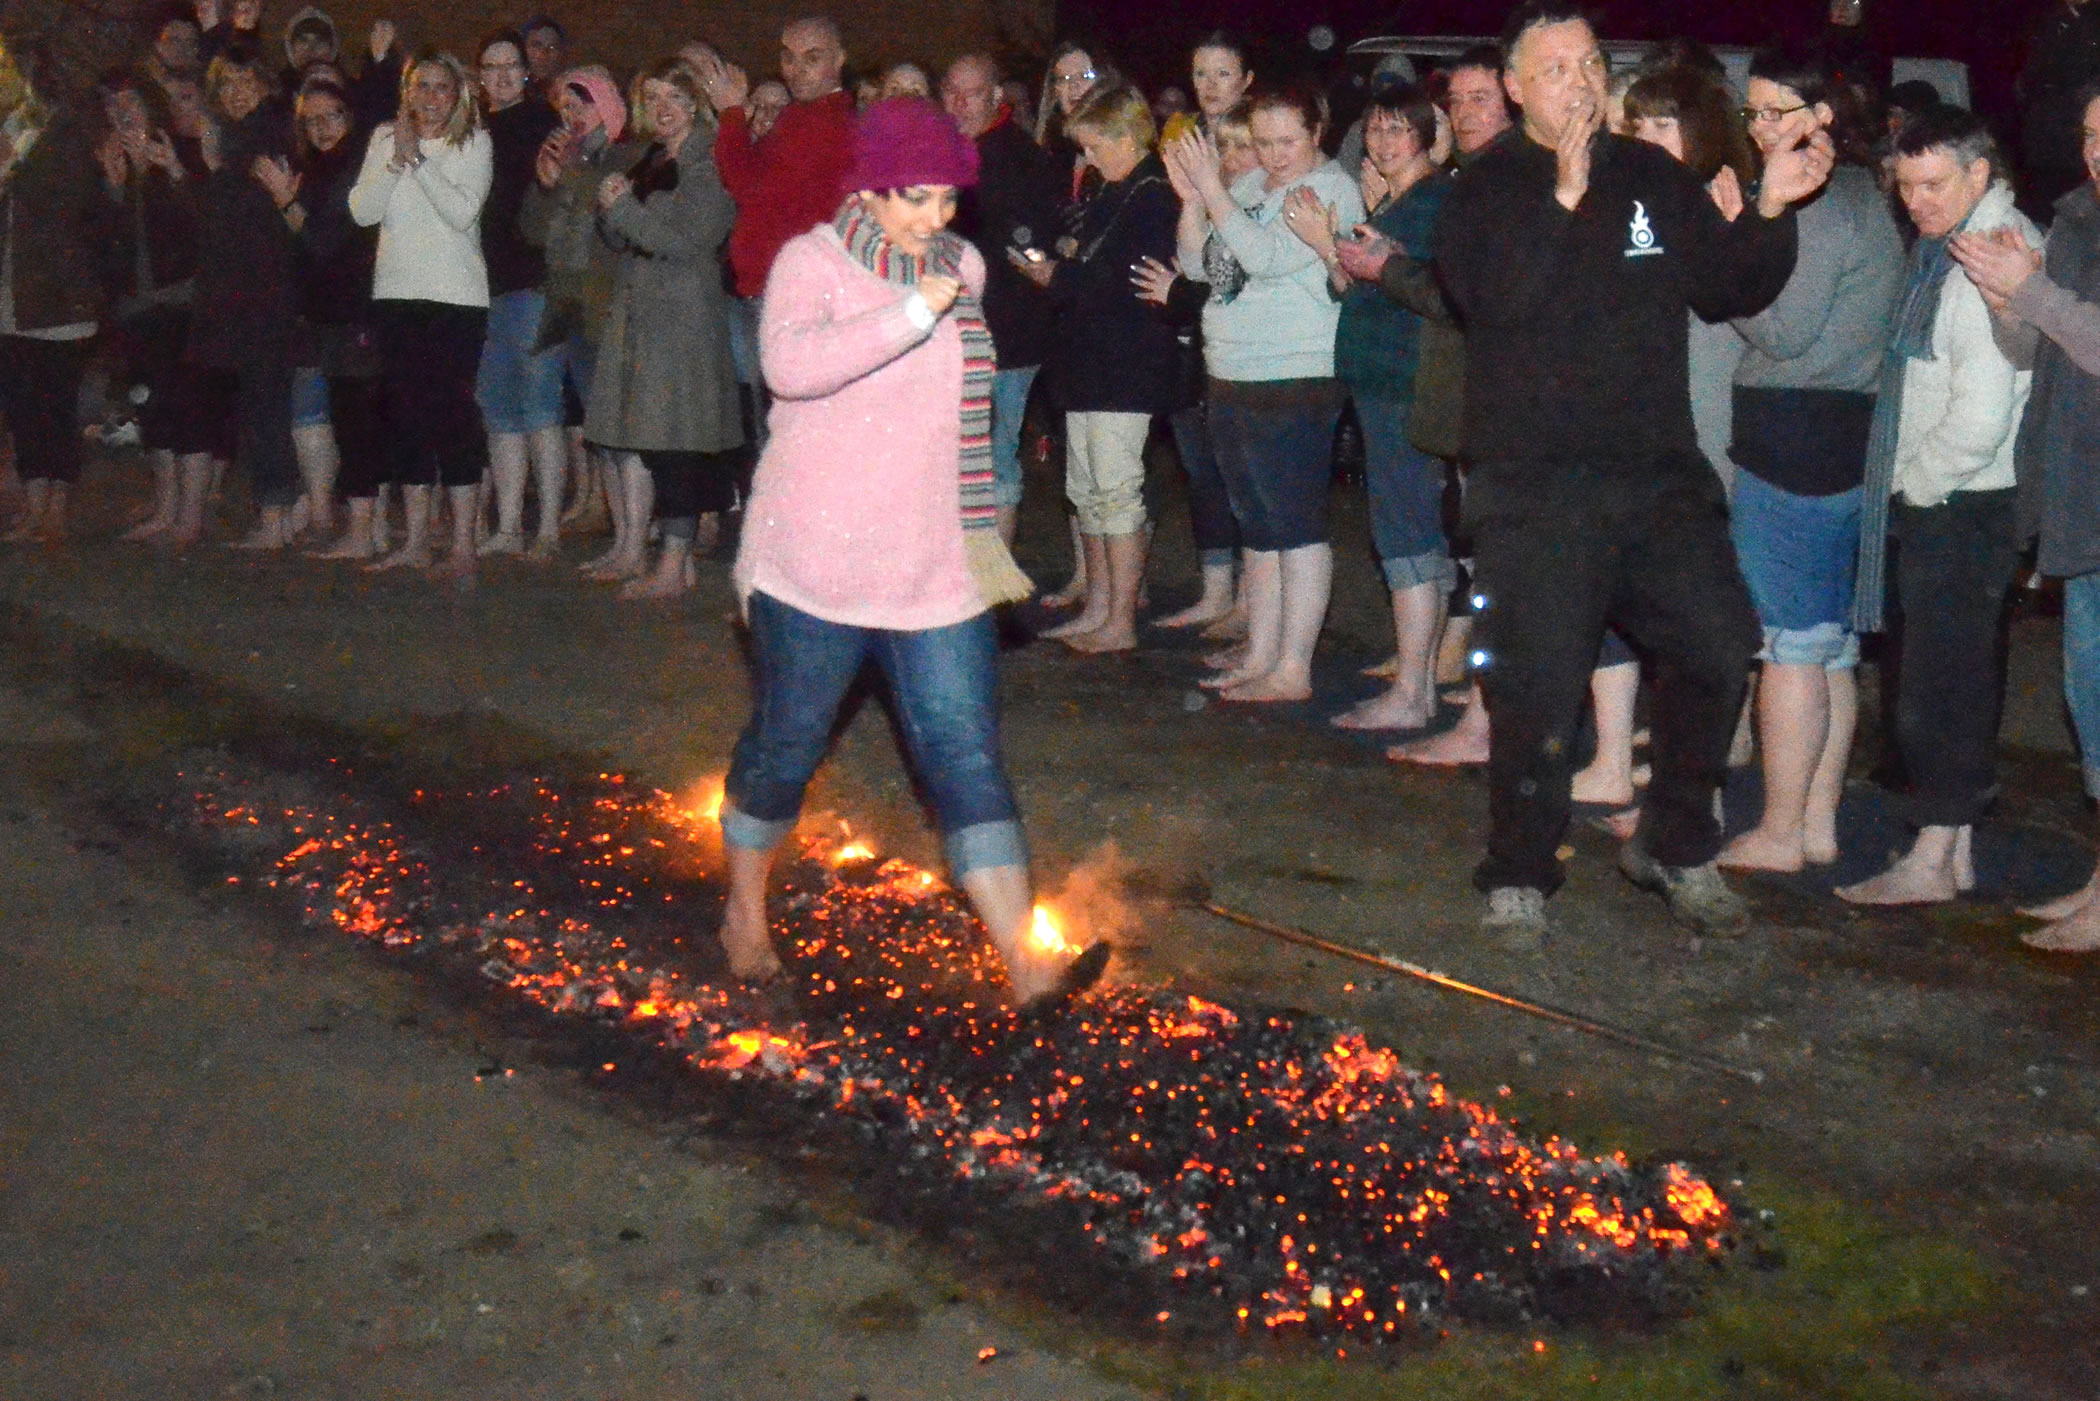 Firewalk at Esher Rugby Club for Princess Alice Hospice - Lady walking over coals